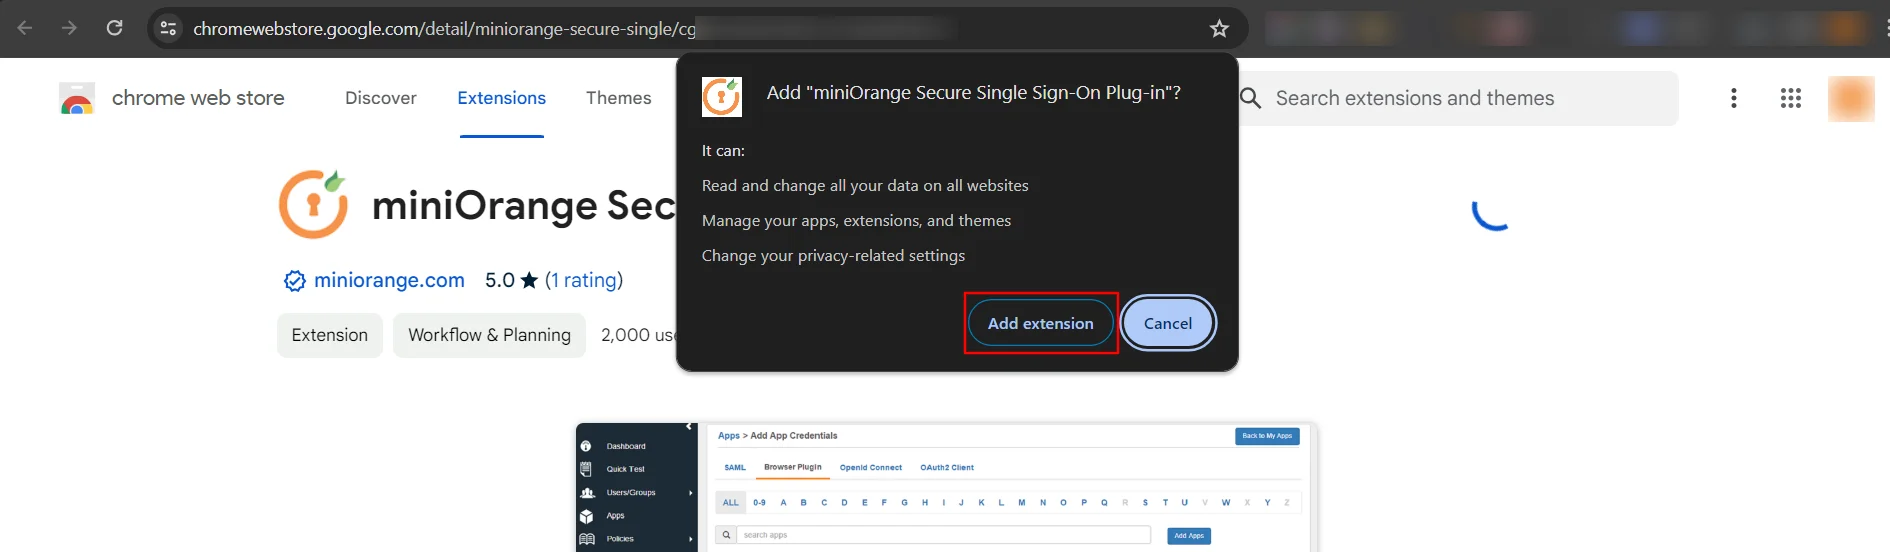 Breathe HR Single Sign-On (sso) extension added in chrome